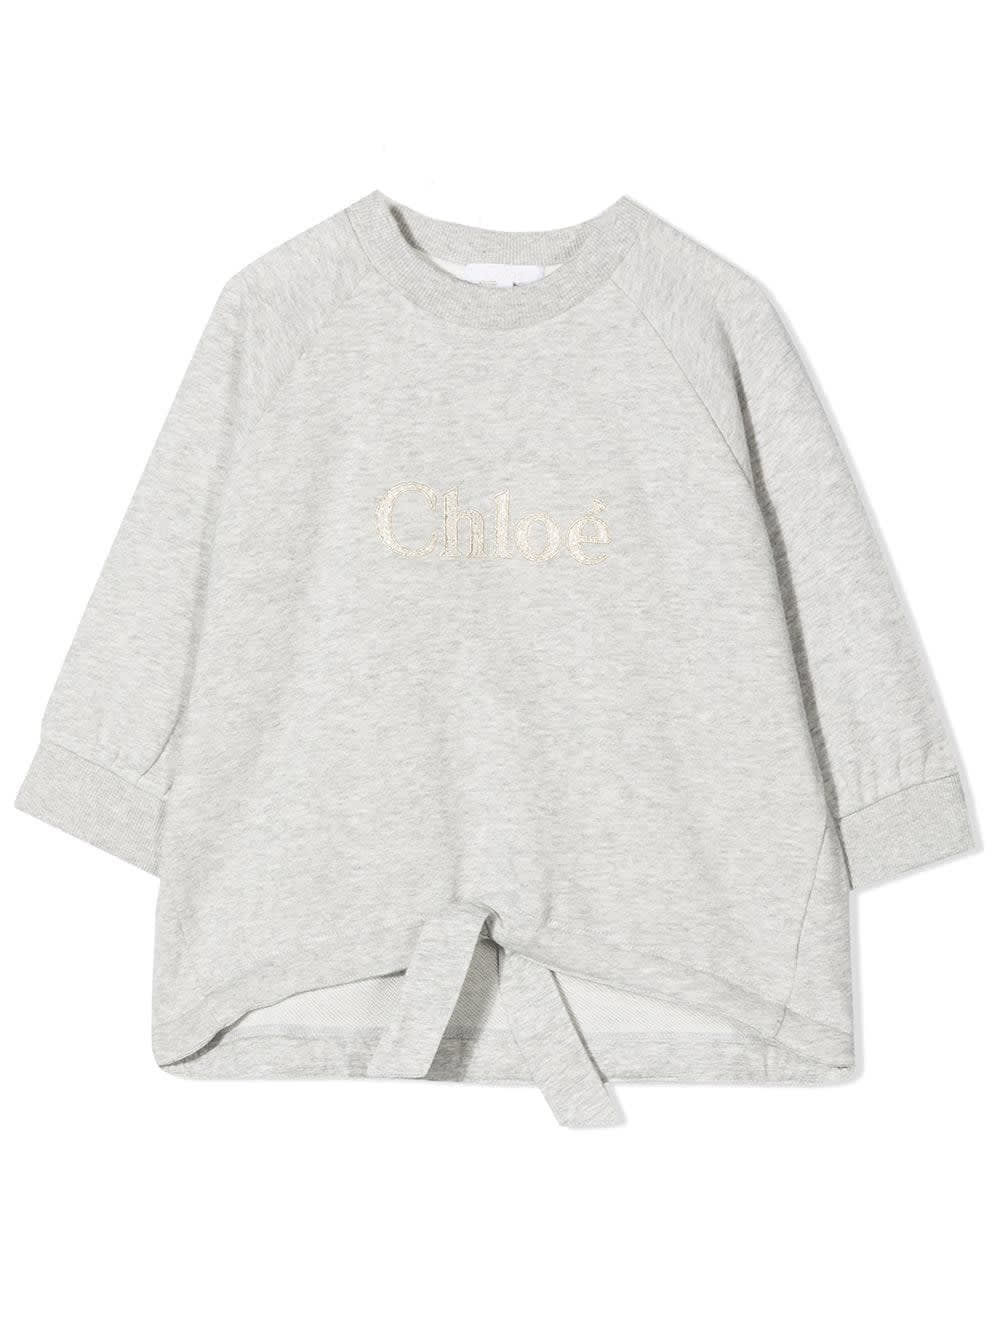 CHLOÉ SWEATSHIRT WITH EMBROIDERED LOGO,C15B79 A32